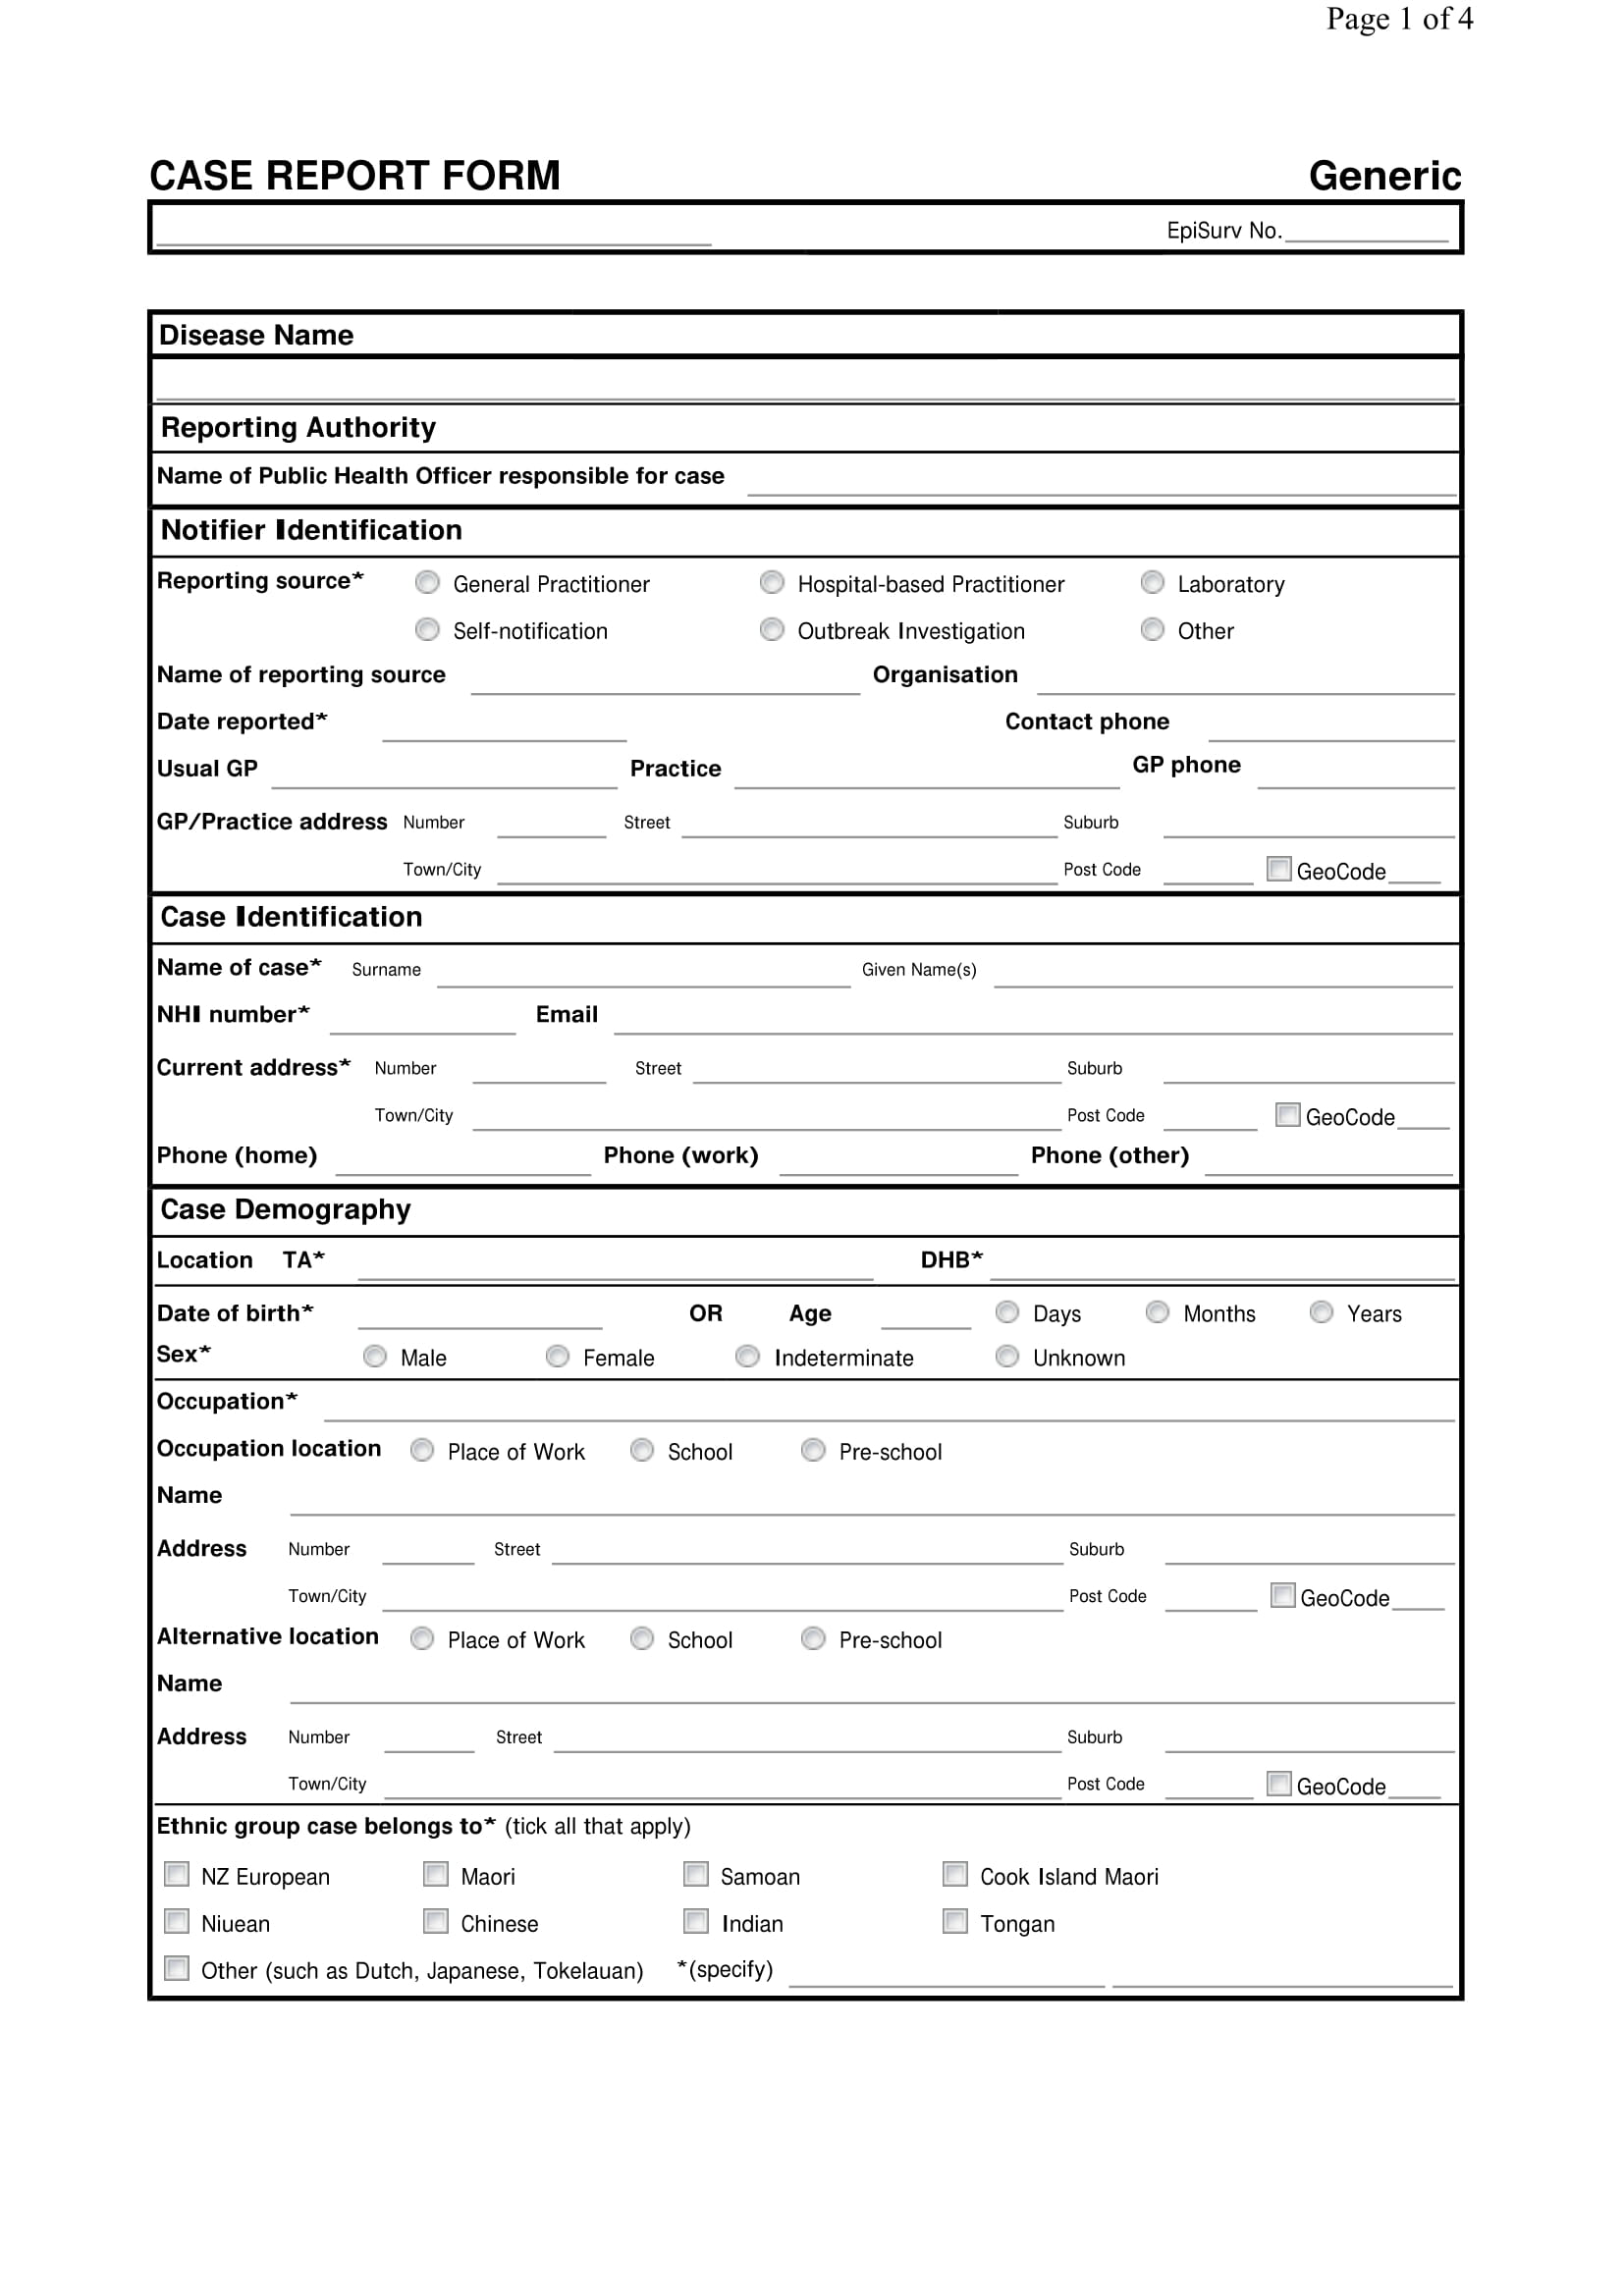 generic sample for case report form 1